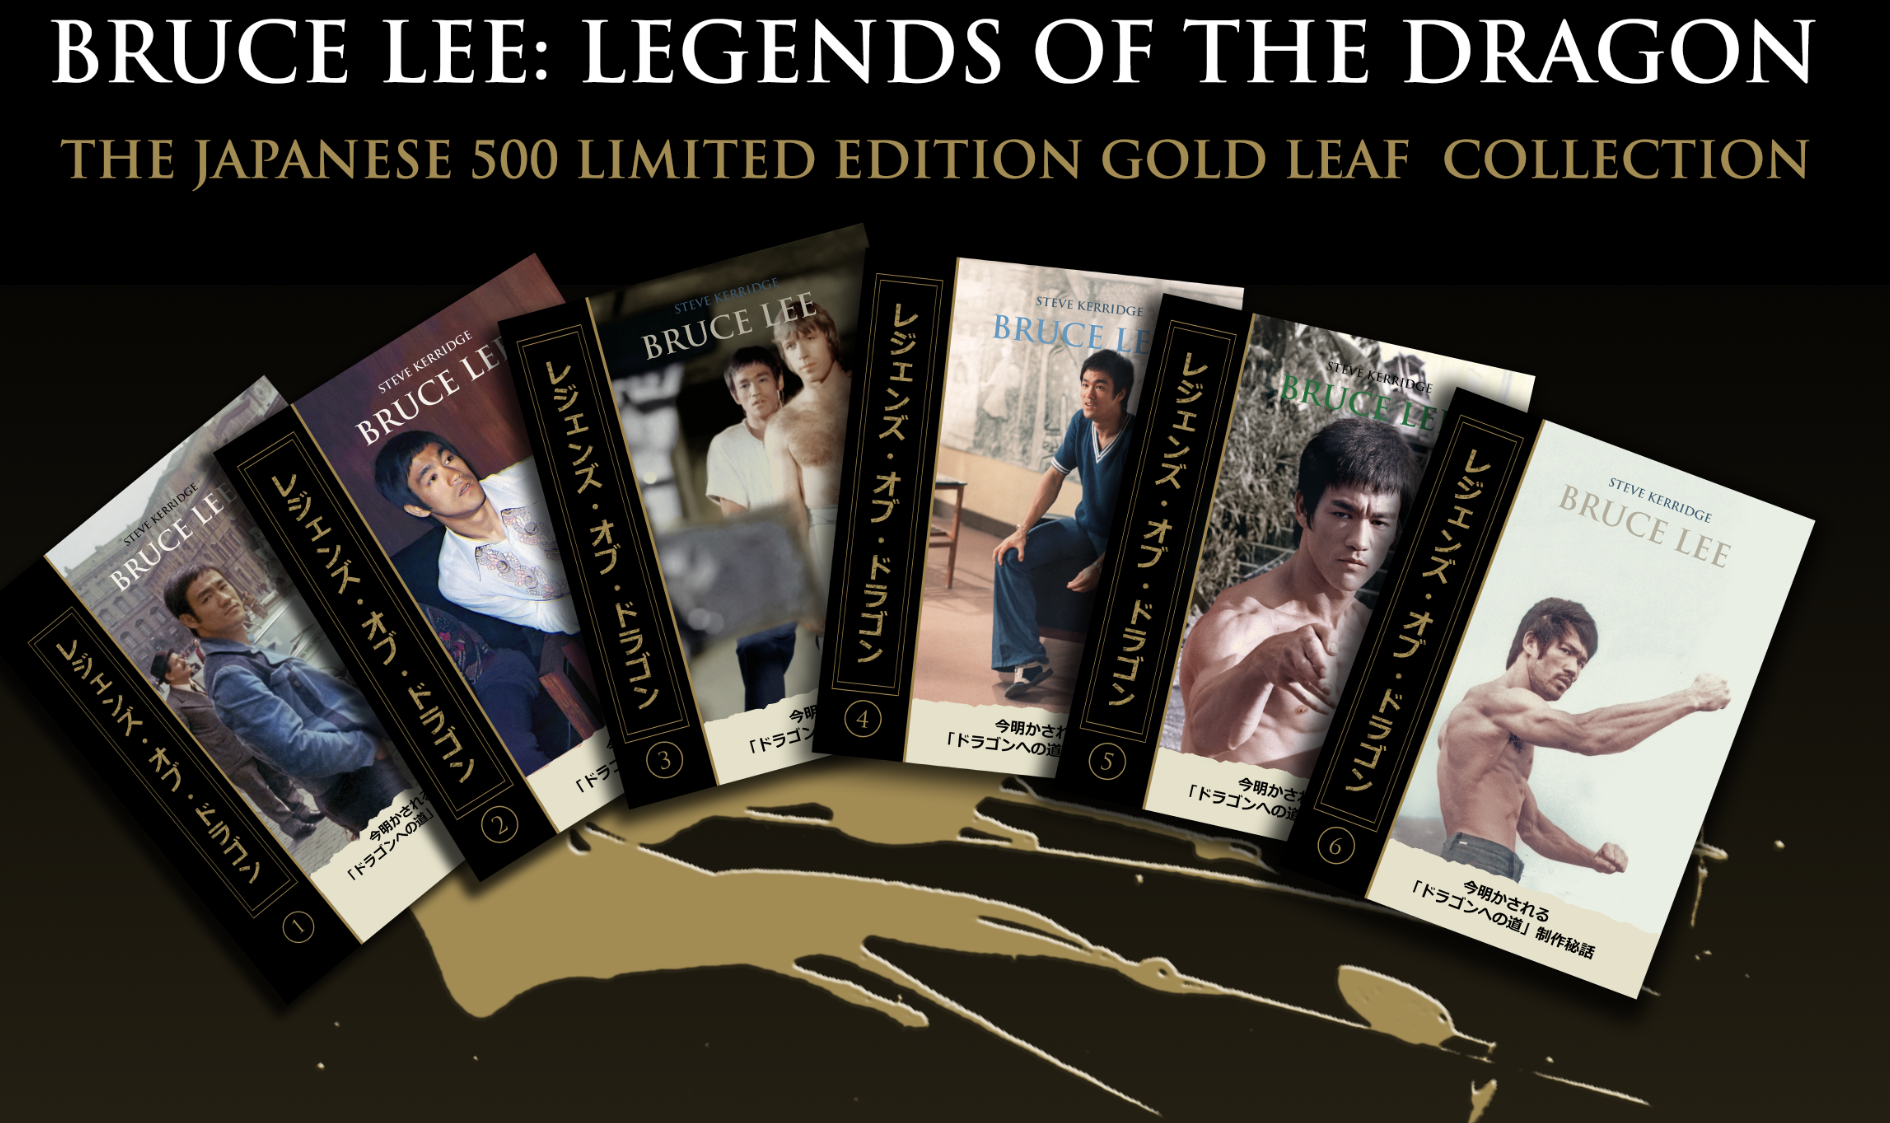 BRUCE LEE: LEGENDS OF THE DRAGON - THE JAPANESE 500 LIMITED EDITION GOLD  LEAF COLLECTION - Bruce Lee Forever